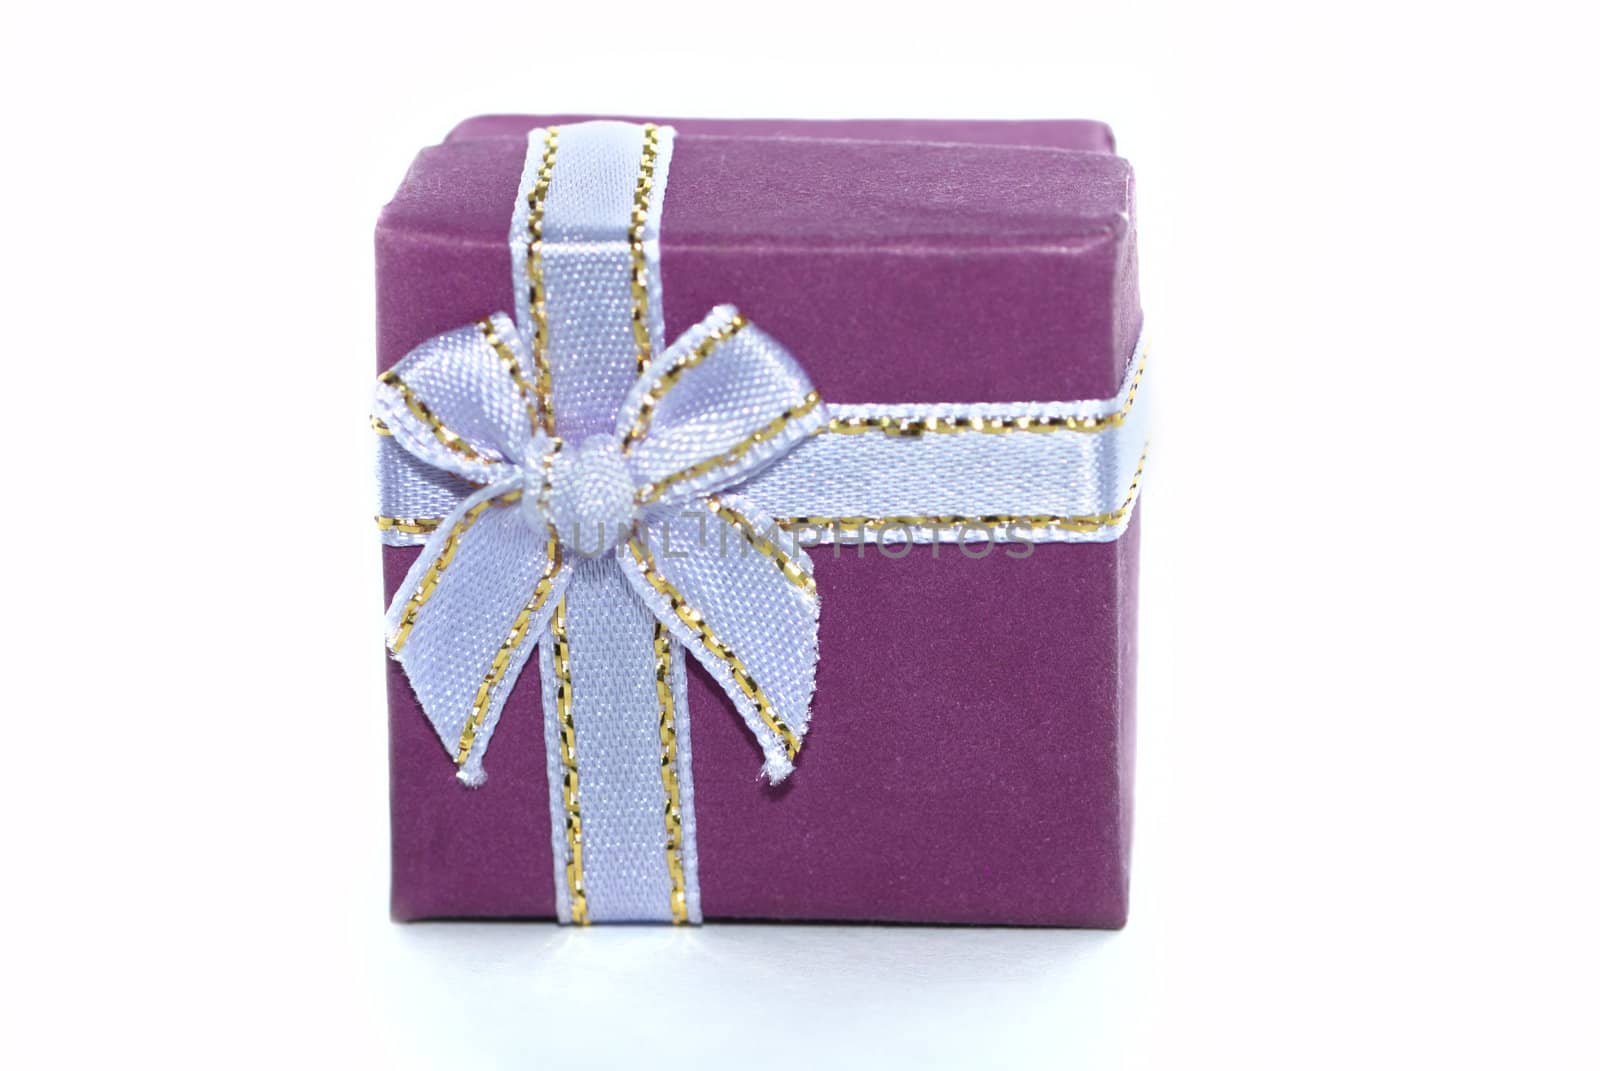 Violet gift box isolated on white